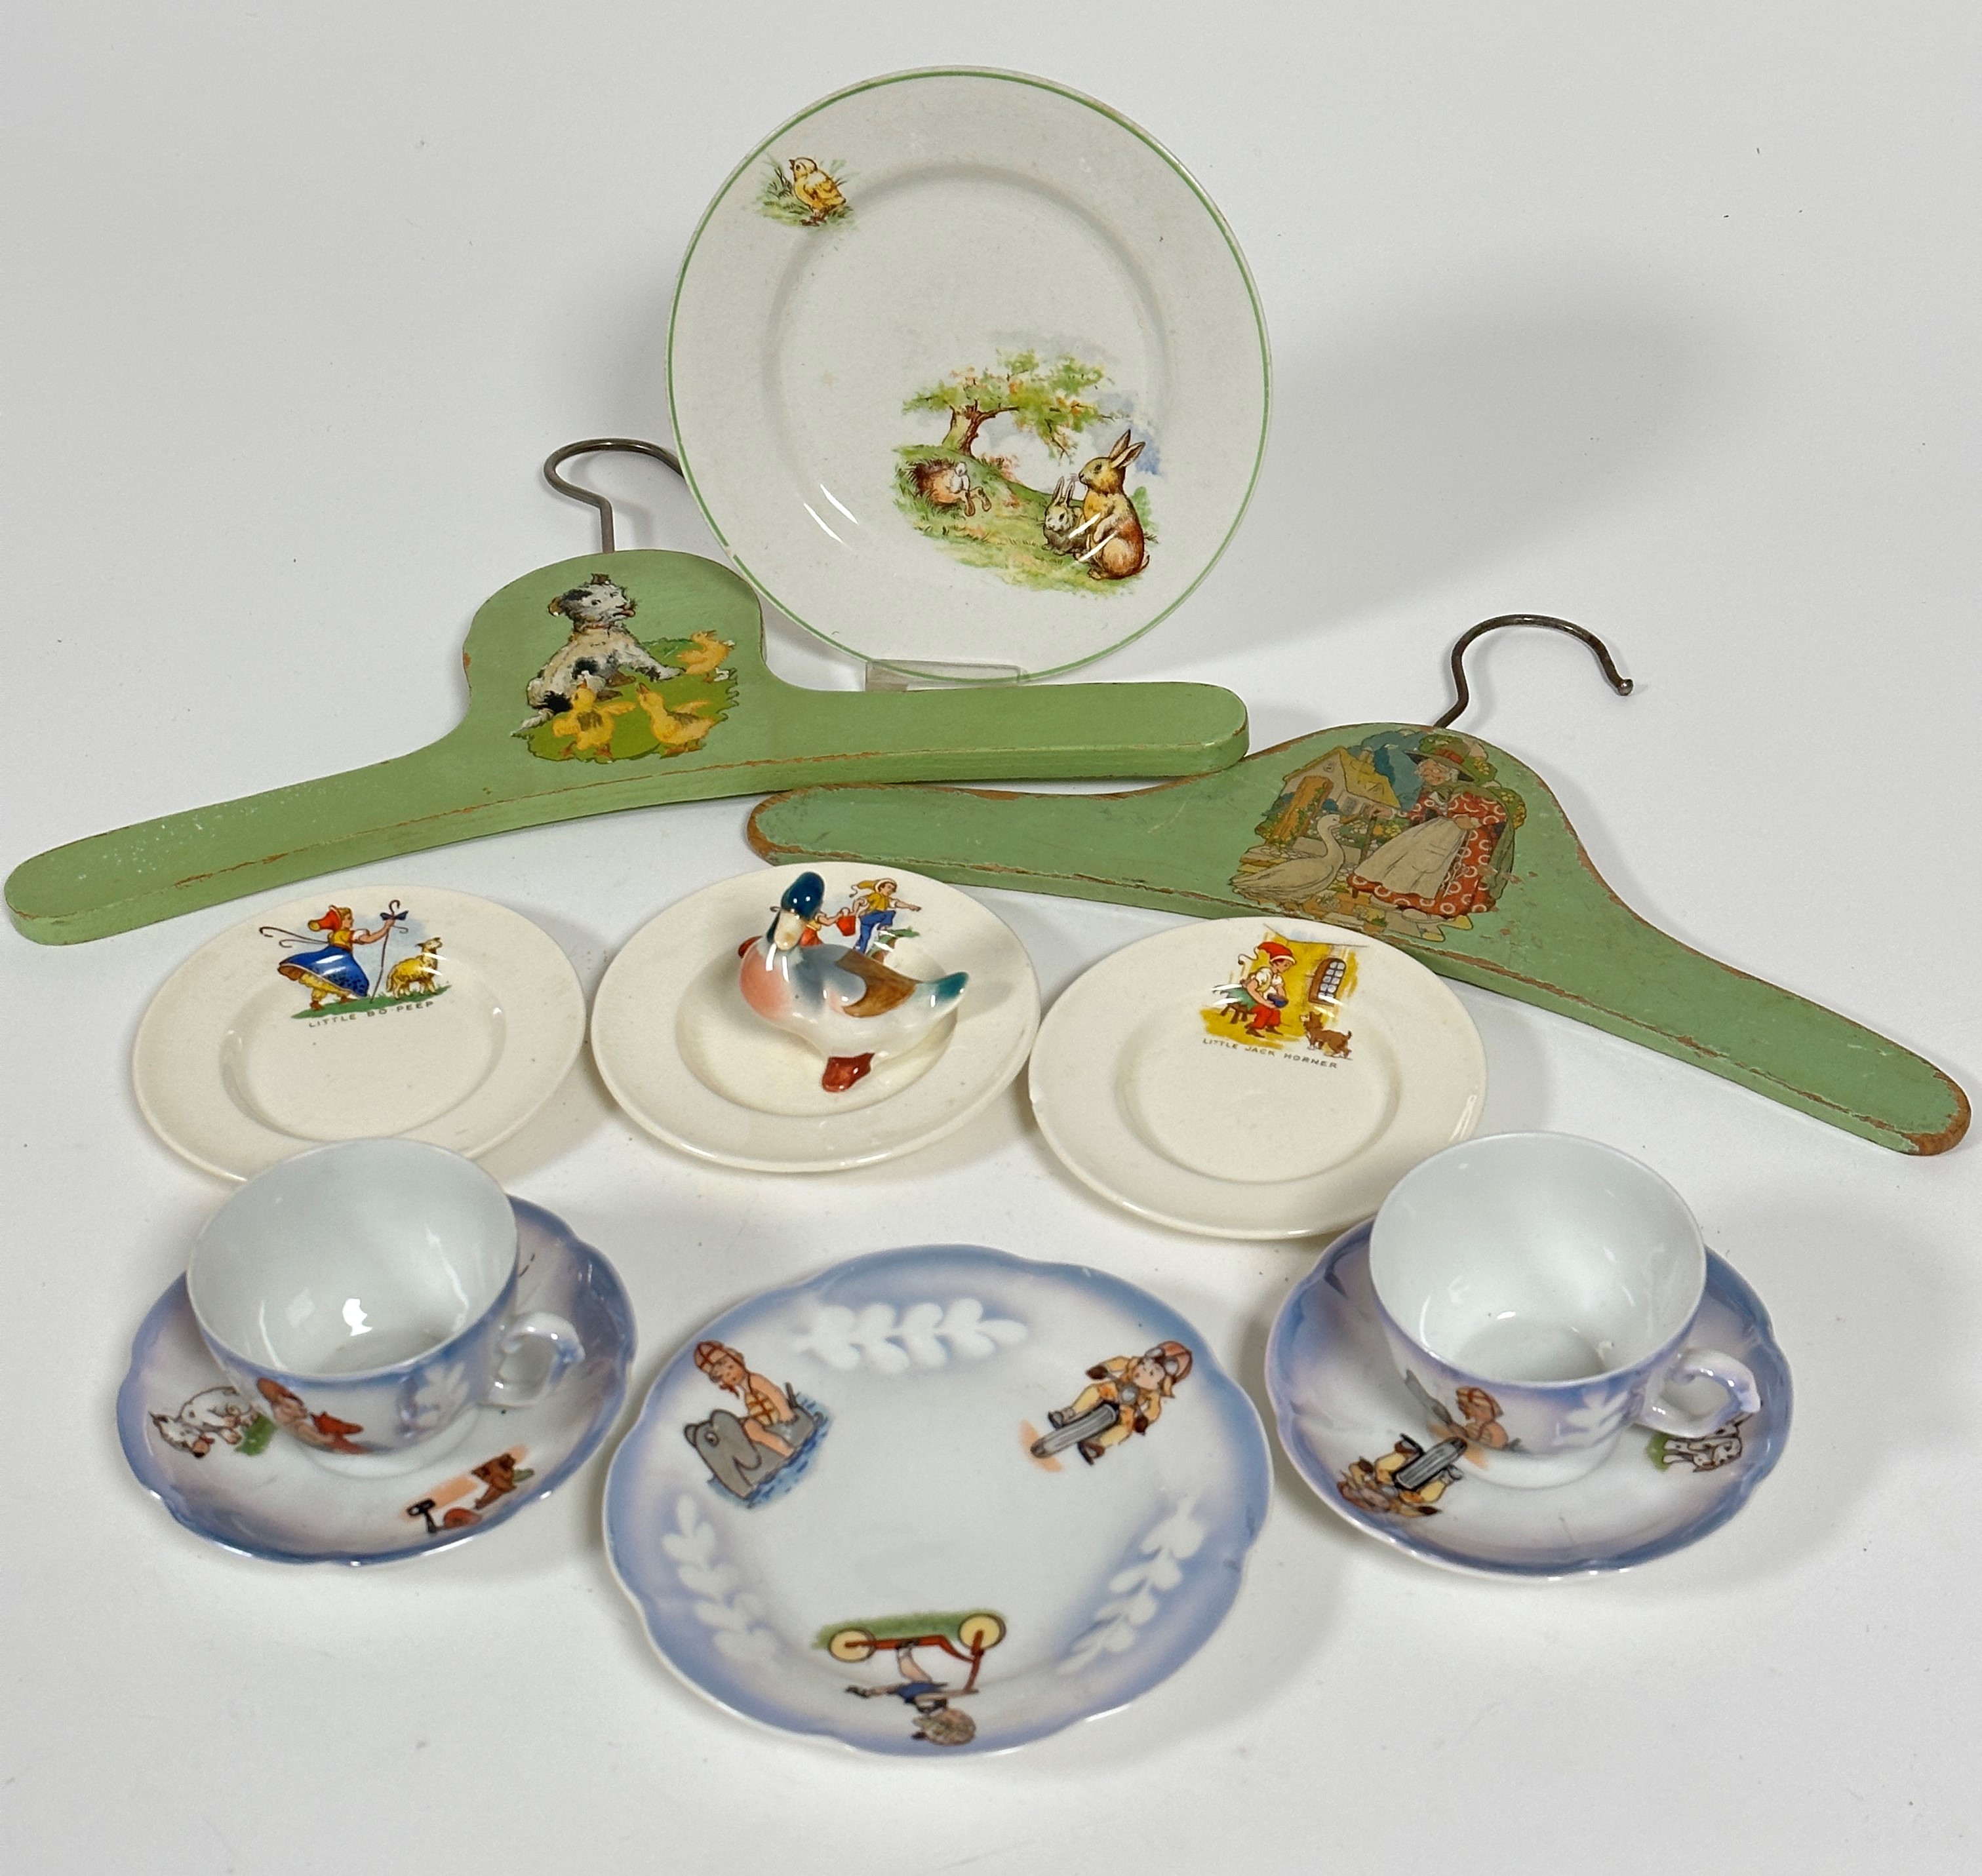 A set of three 1920s children's teaset saucers, decorated with Jack and Jill, Little Bo Peep, Little